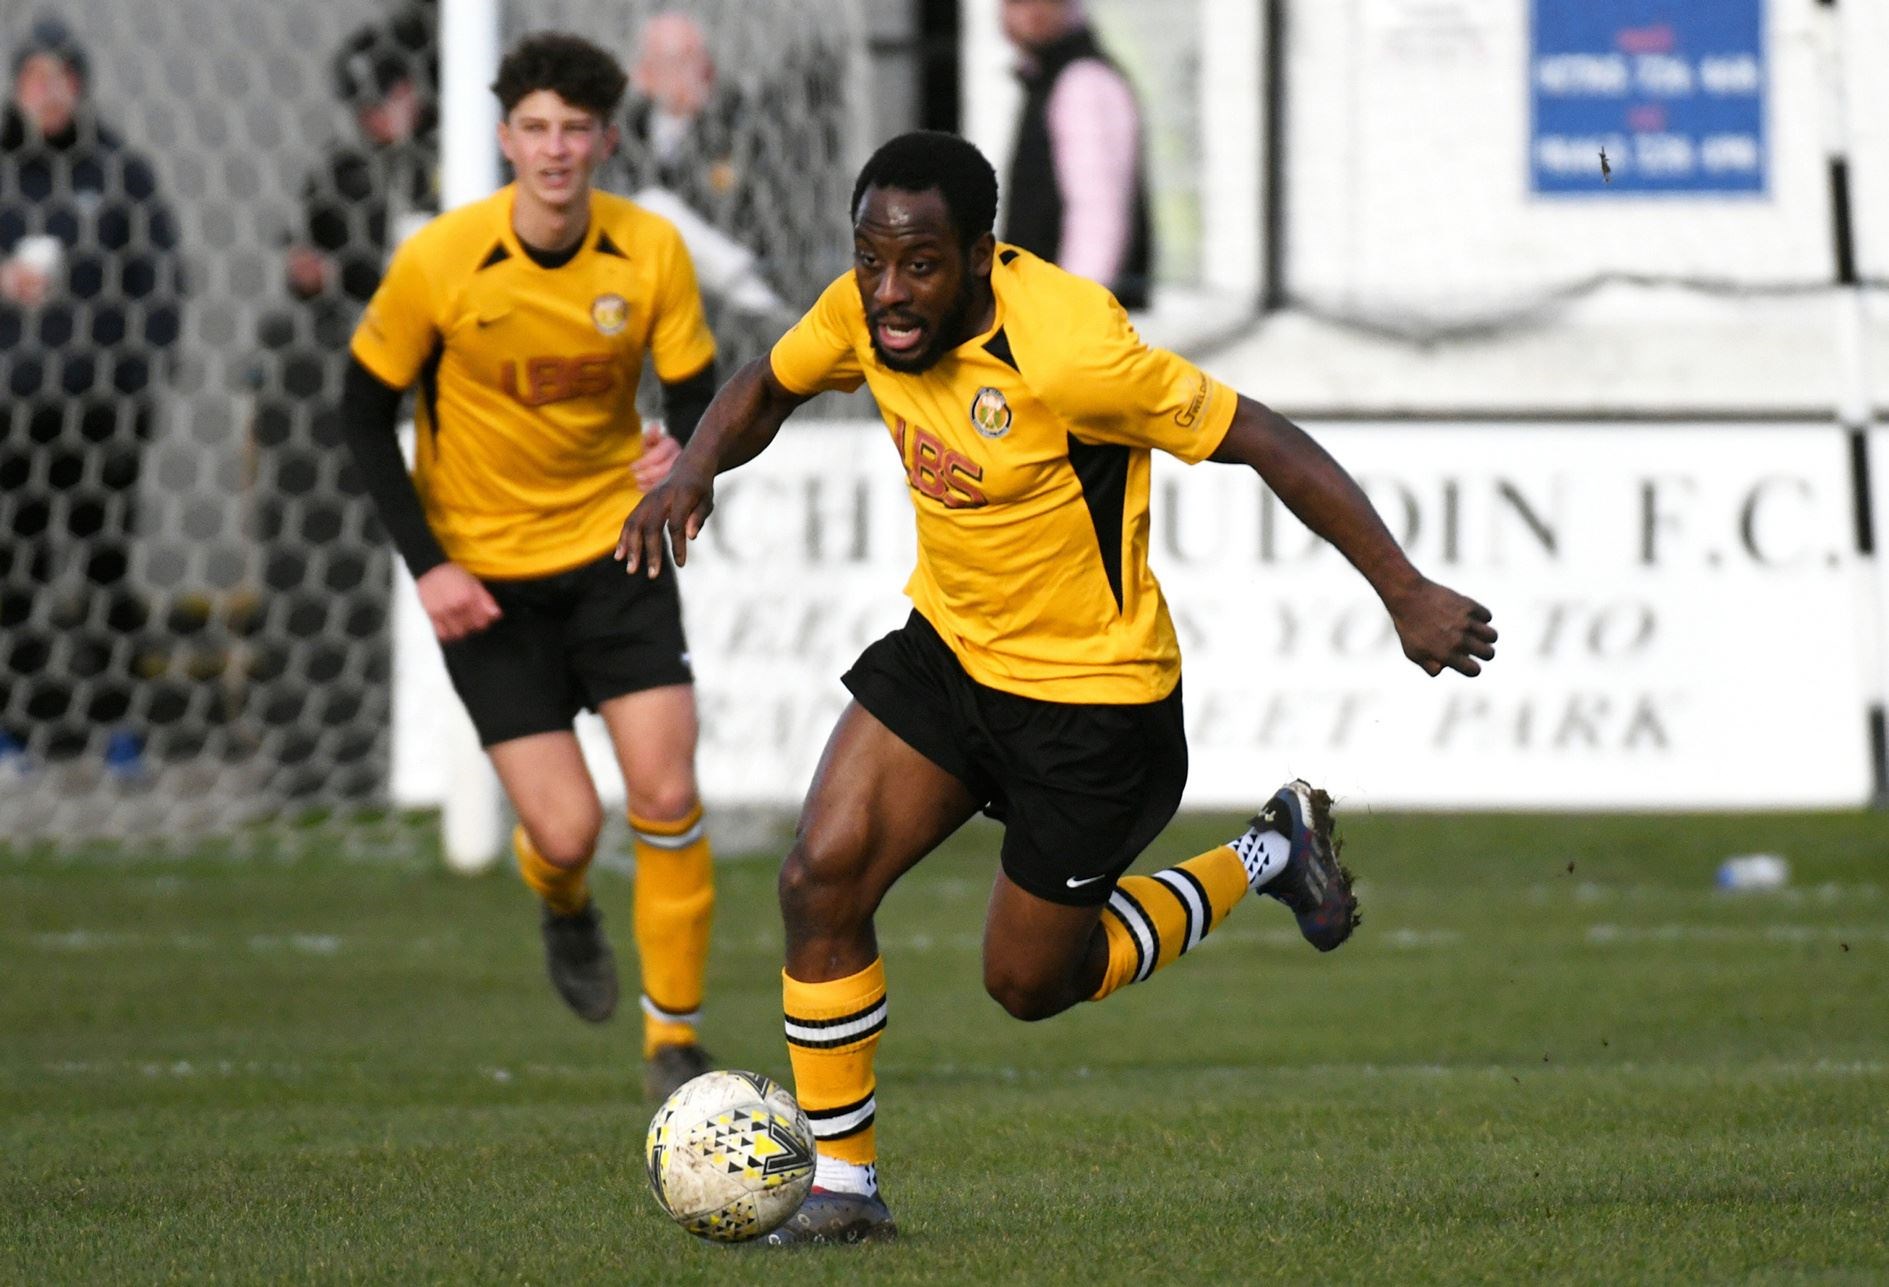 Manager Charlie Brown has praised midfielder Darren Brew for his desire to succeed. Picture: James Mackenzie.